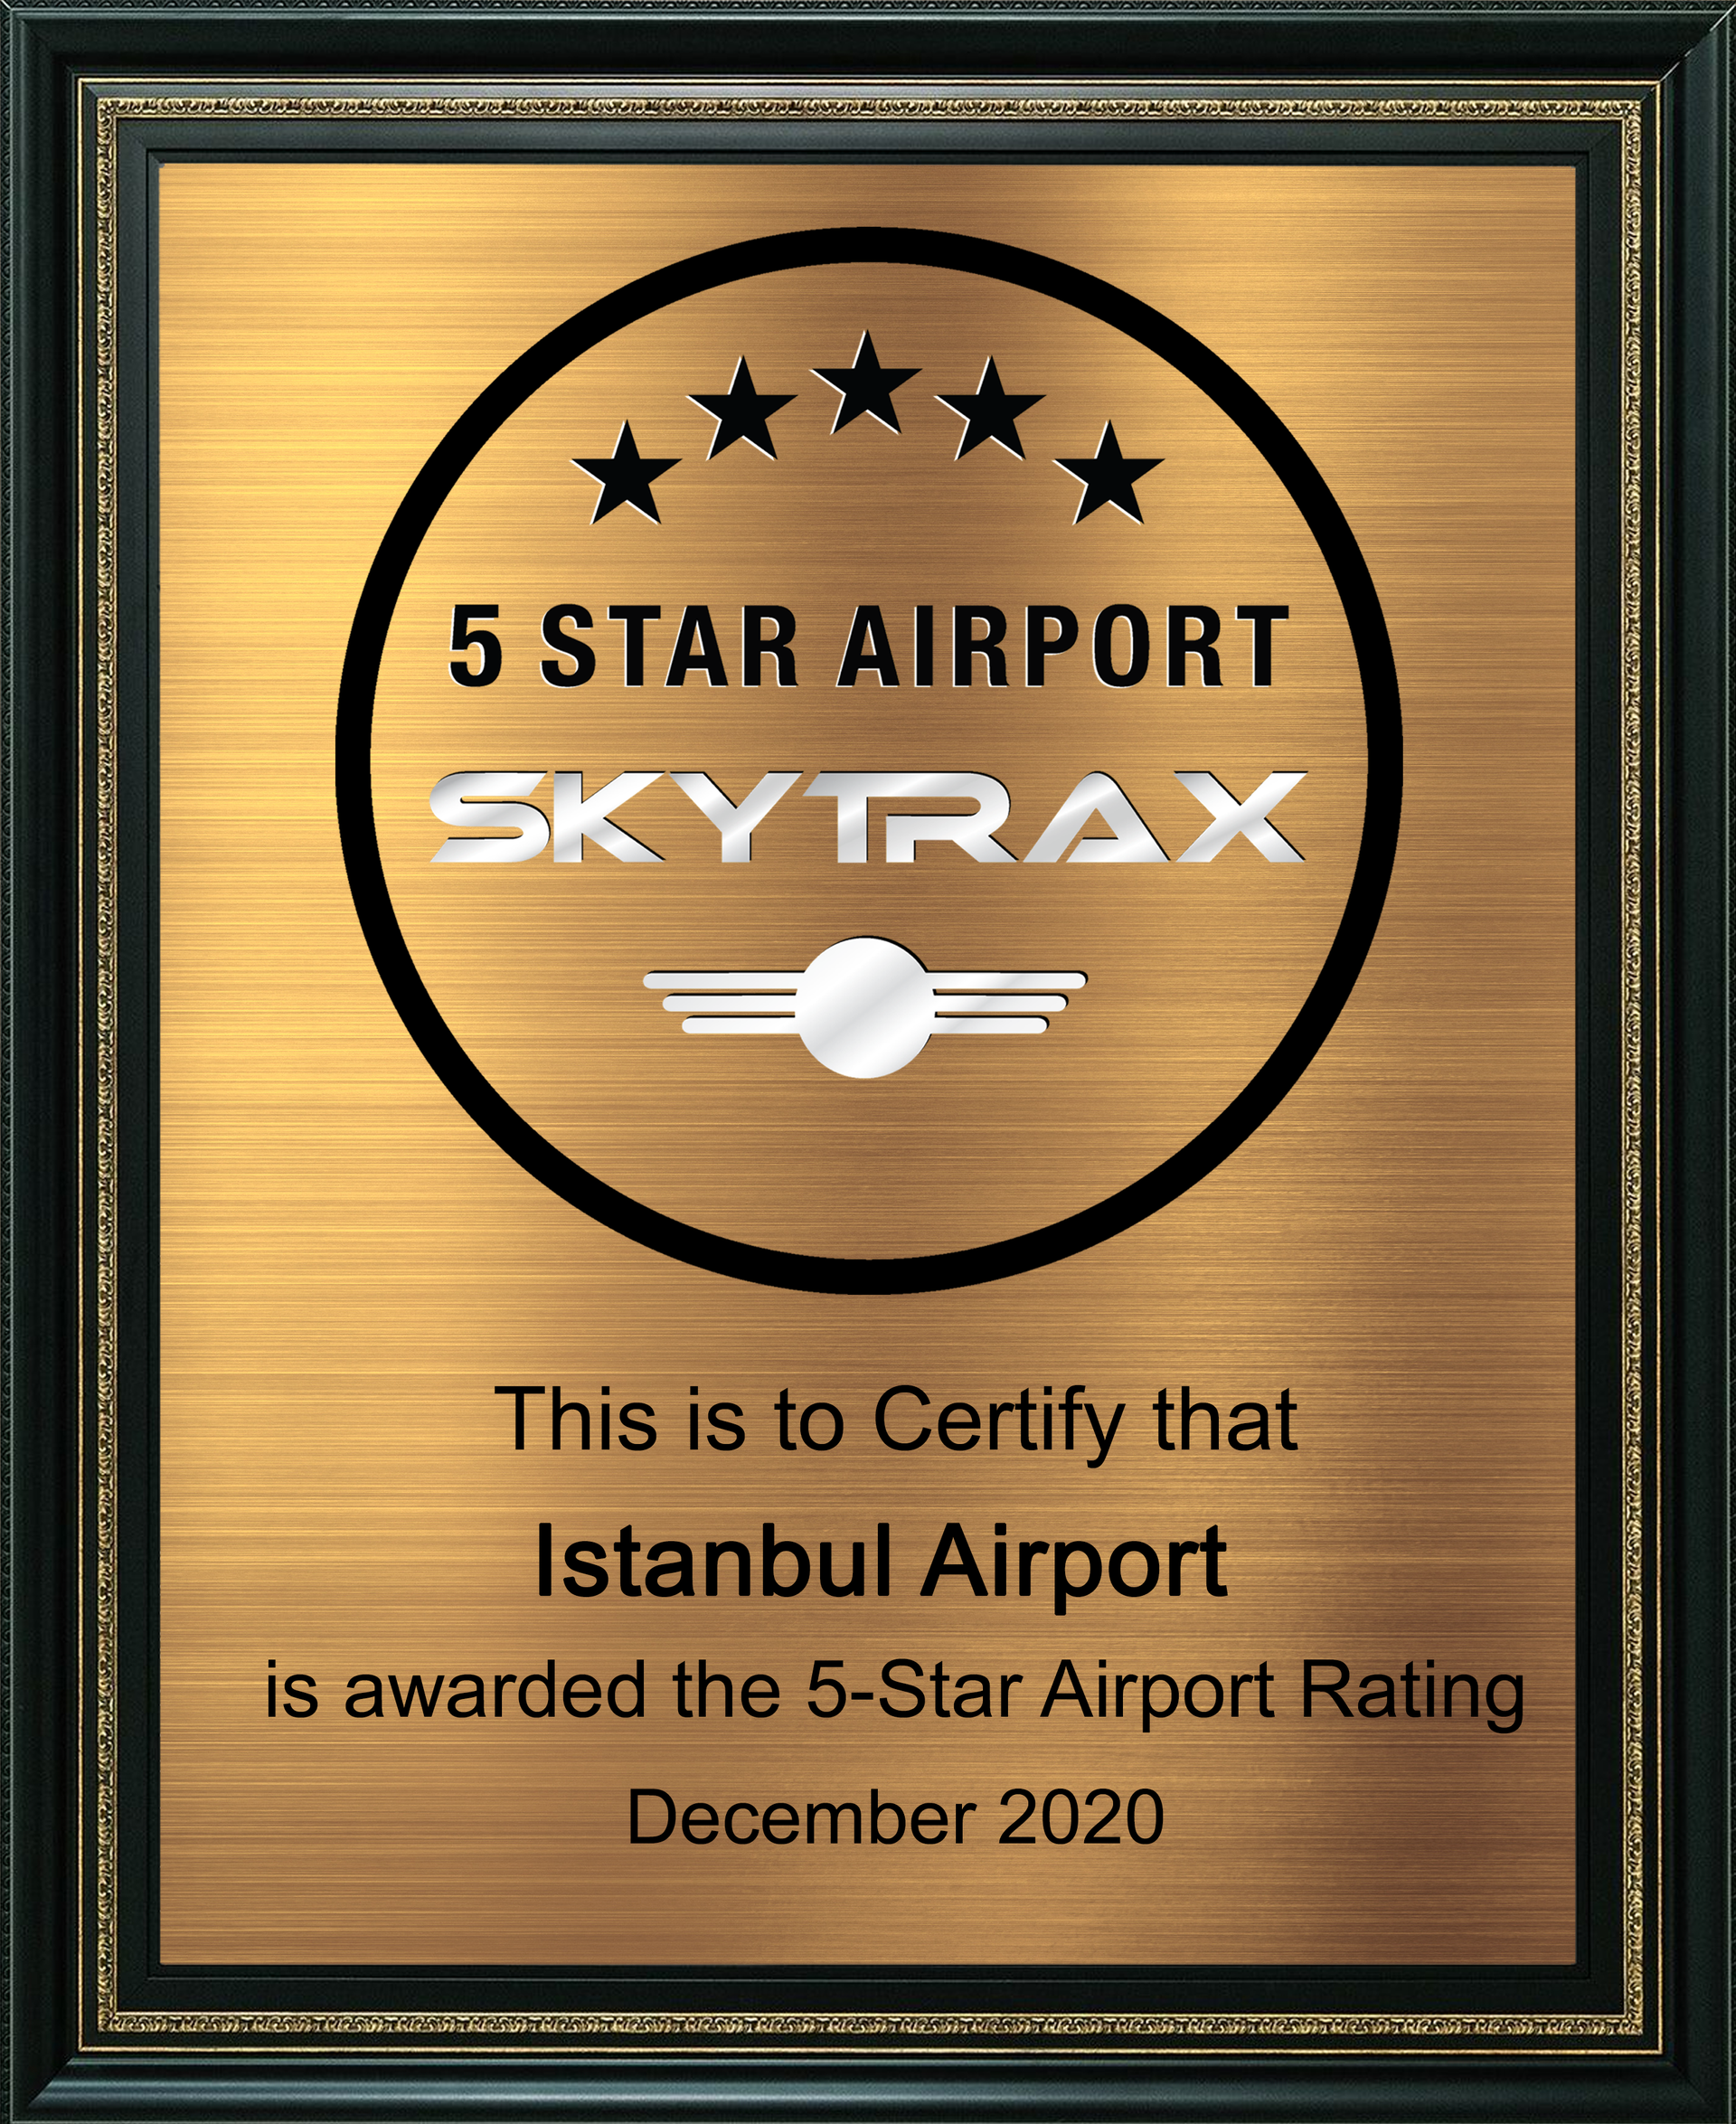 five star rating for istanbul airport from the international aviation organization skytrax aviation pros